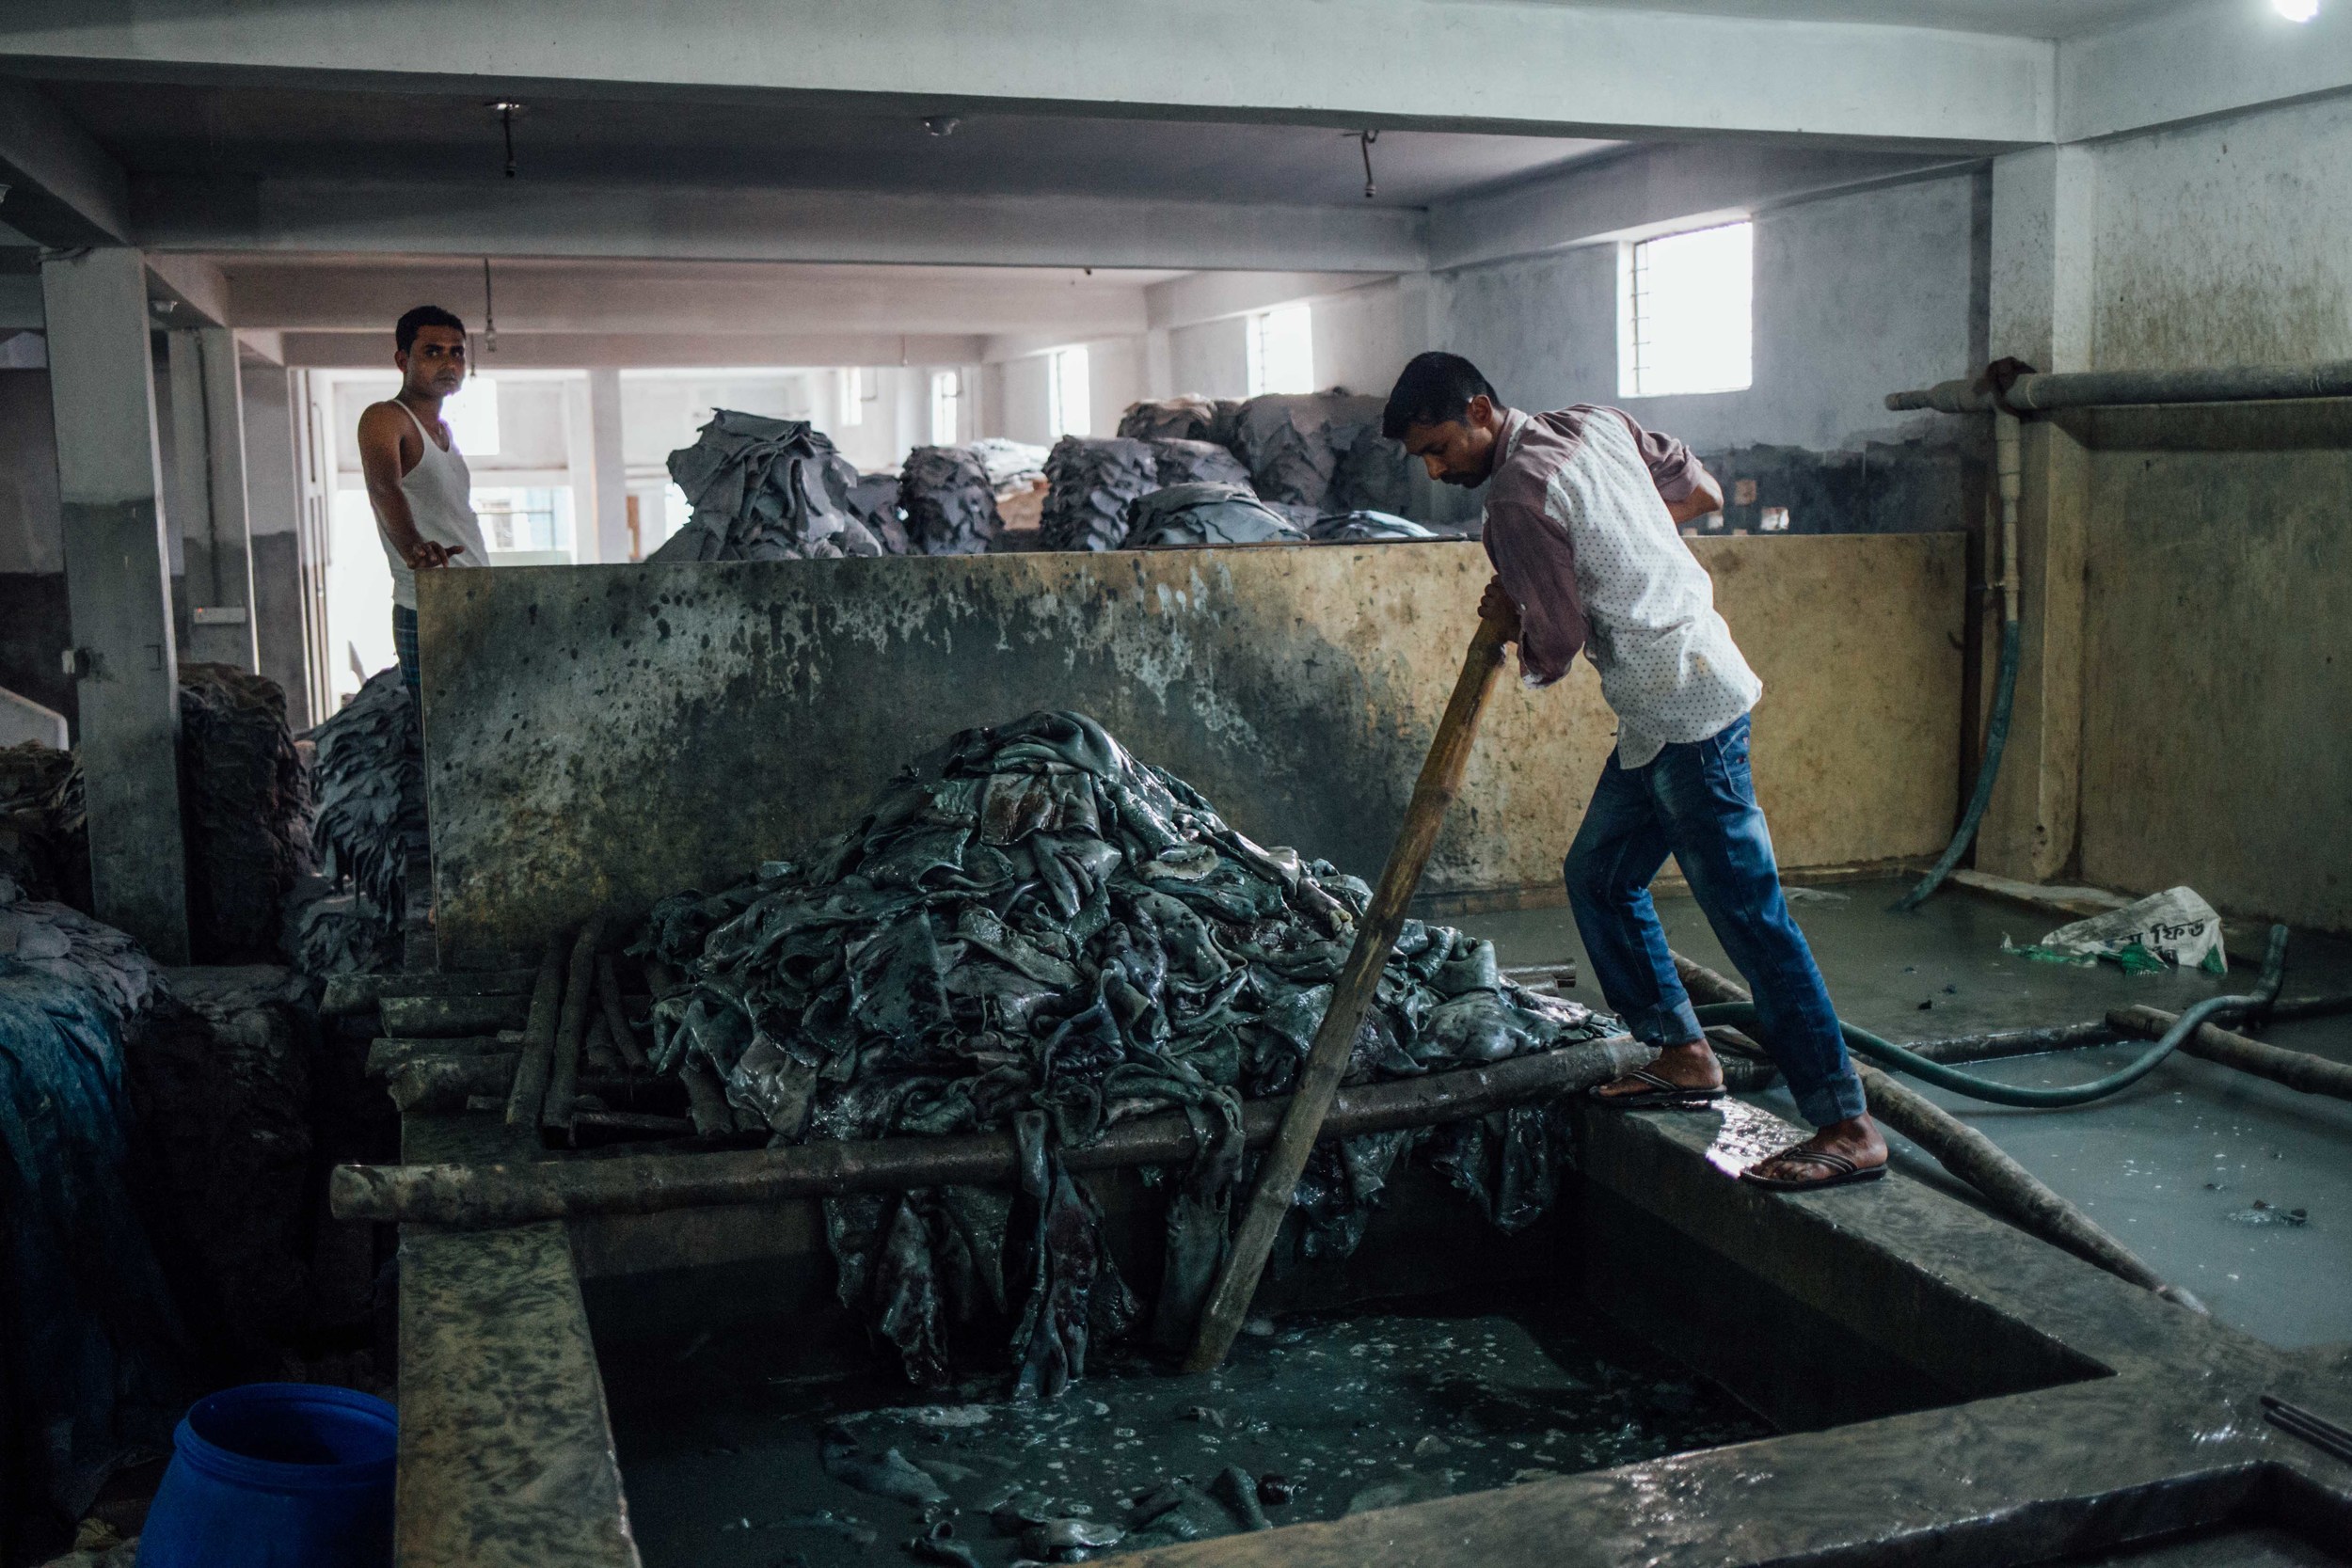  Following the "wet blue" process where the hides are bleached, workers manually stir piles of hides in pits filled with bleaching agents to soften them and prepare for drying. 